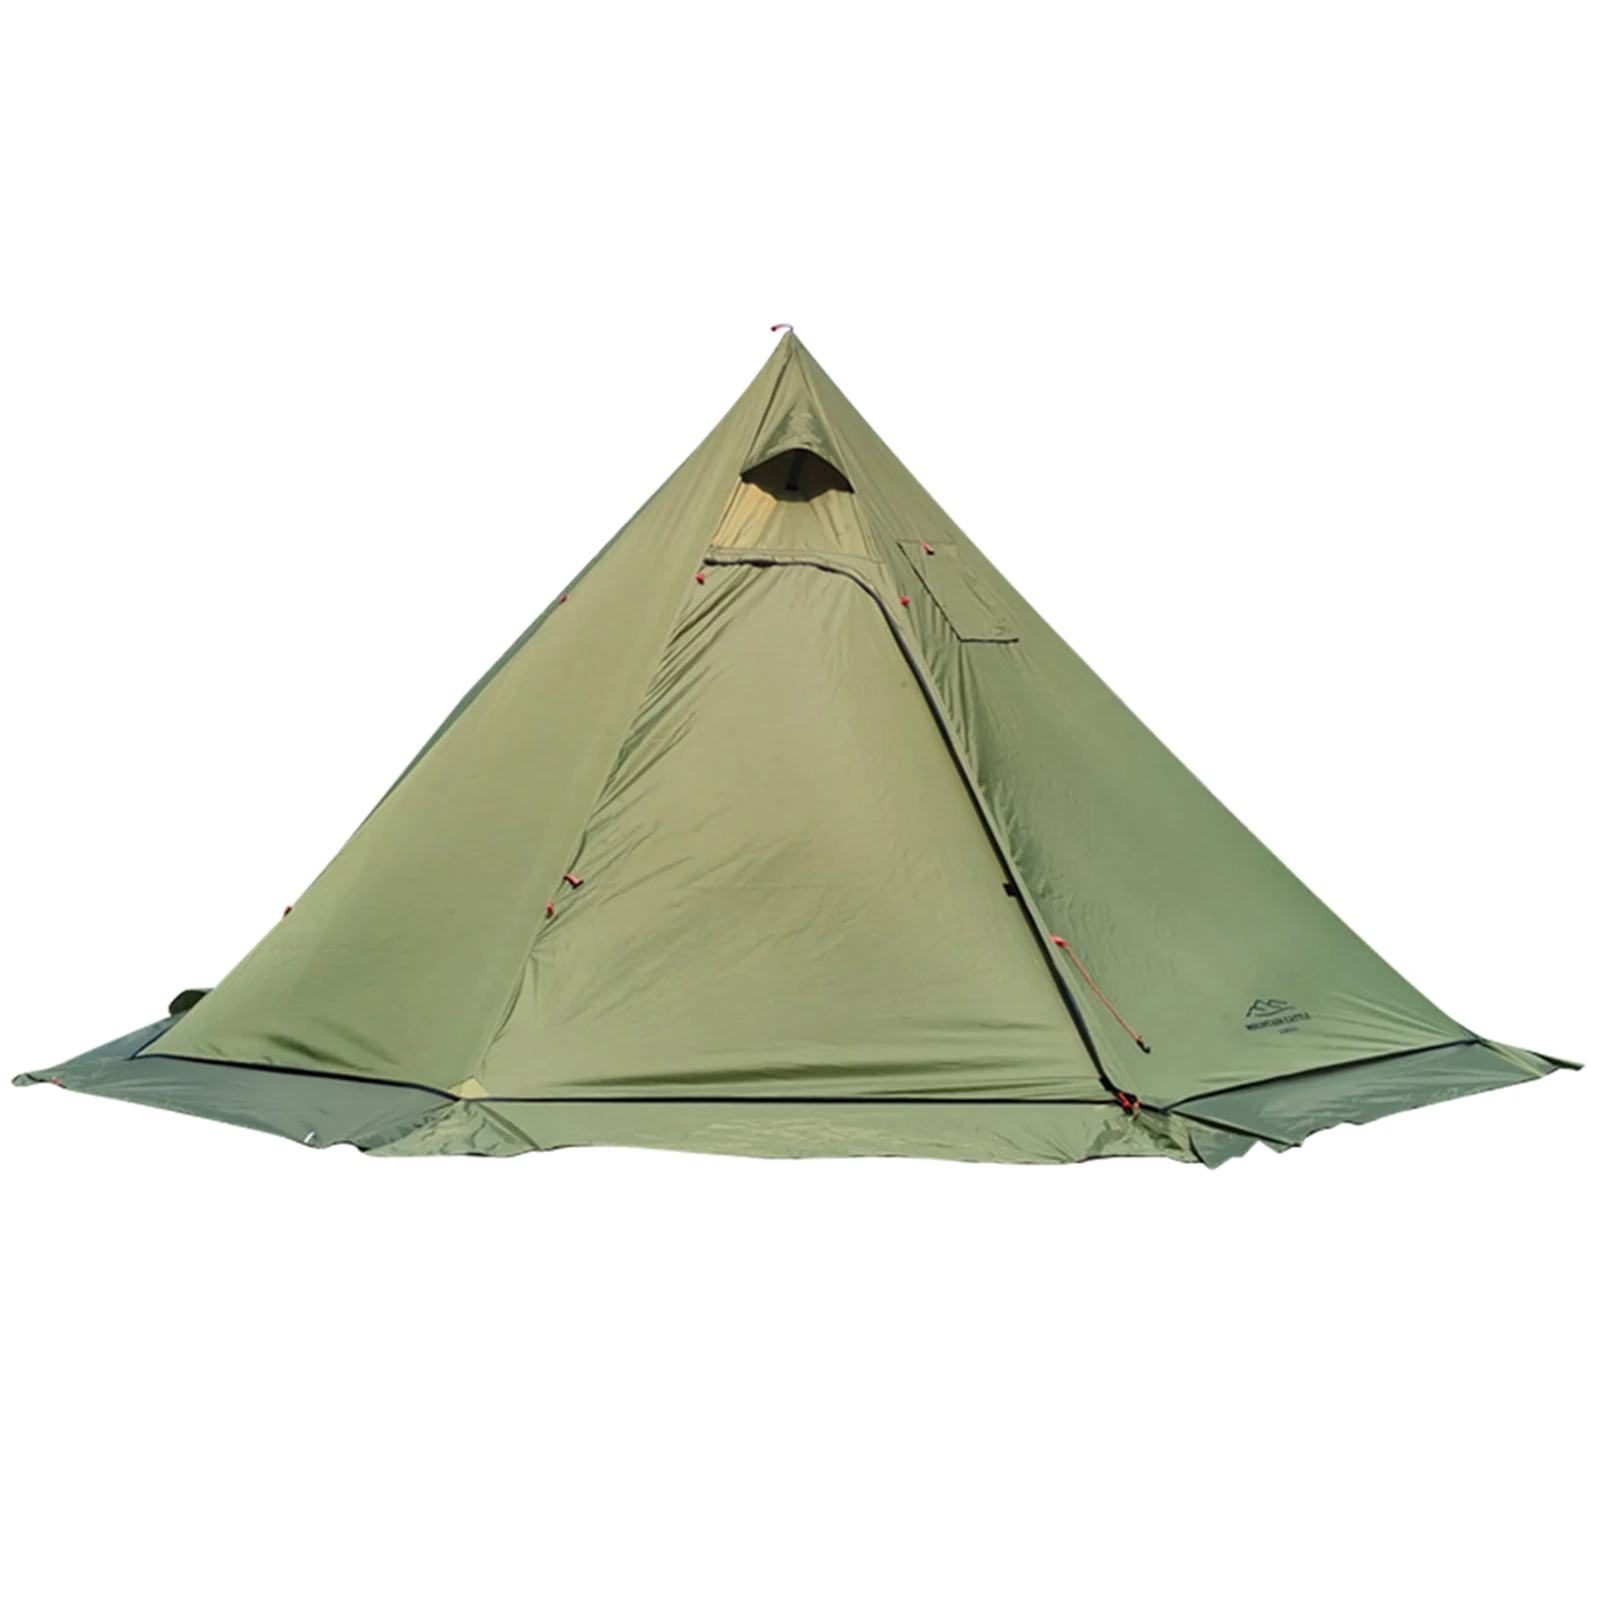 

2 Person Camping Tent Ultralight Outdoor Teepee Tent Rainproof Pyramid Tent with Stove Jack for Picnic Backpacking Hiking